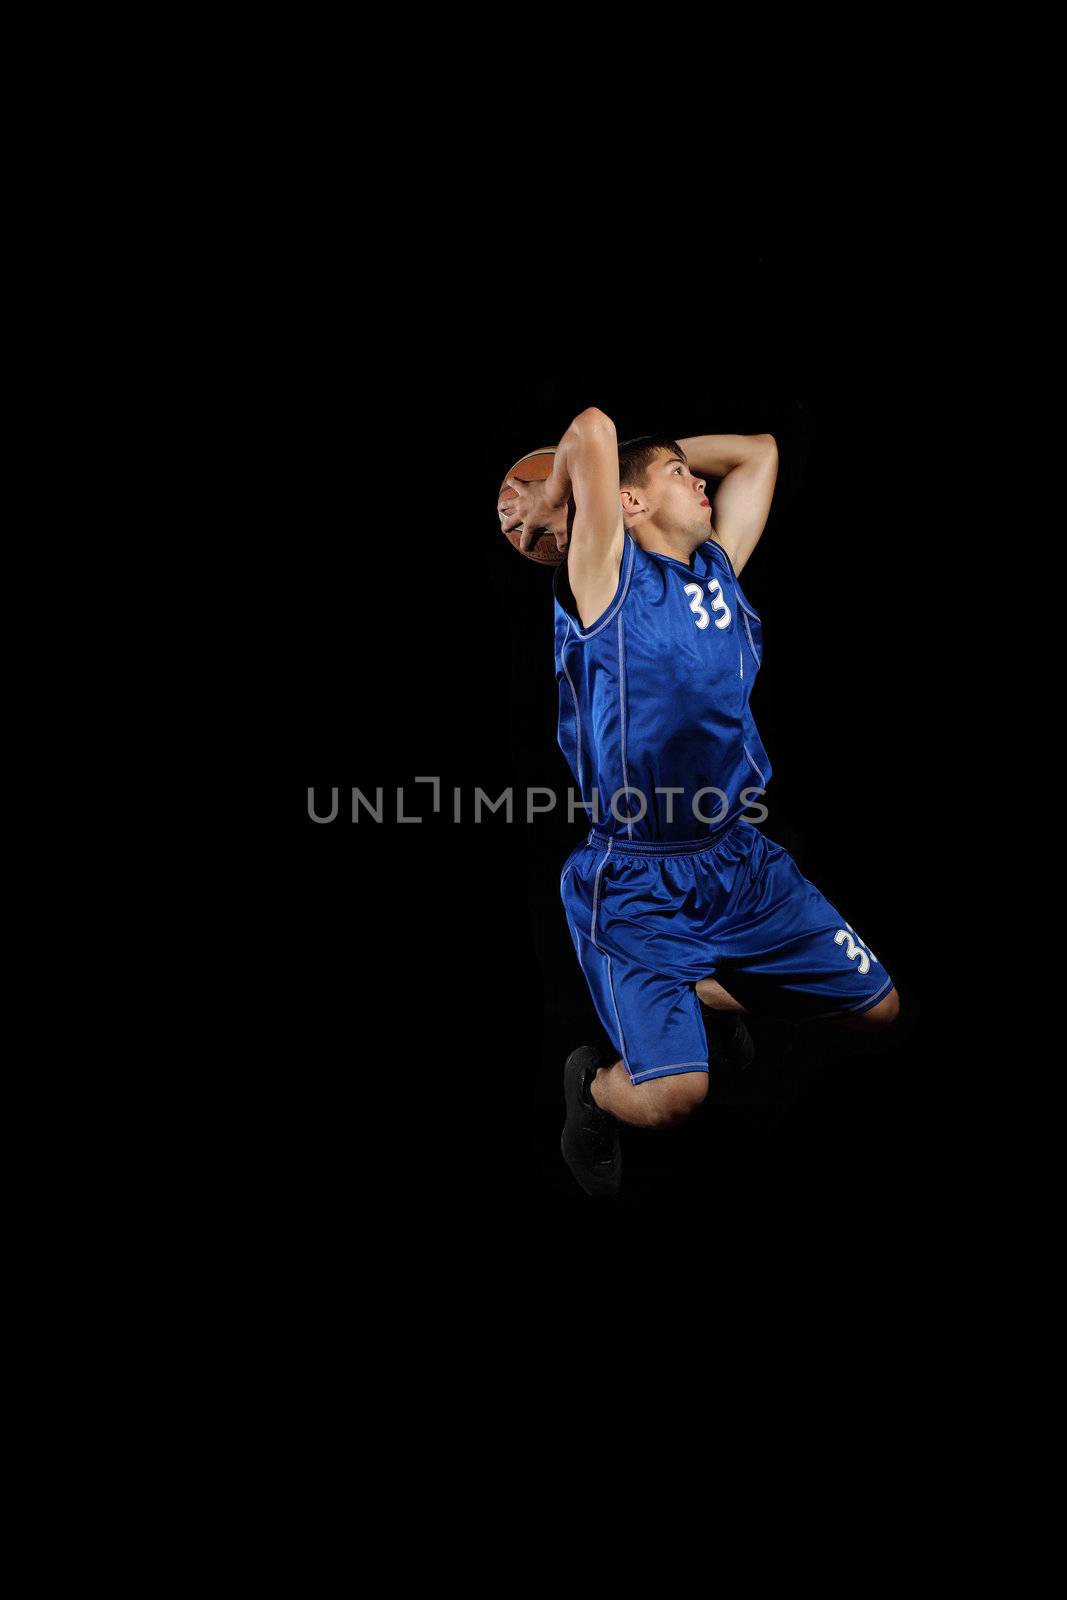 Basketball player with a ball by sergey_nivens